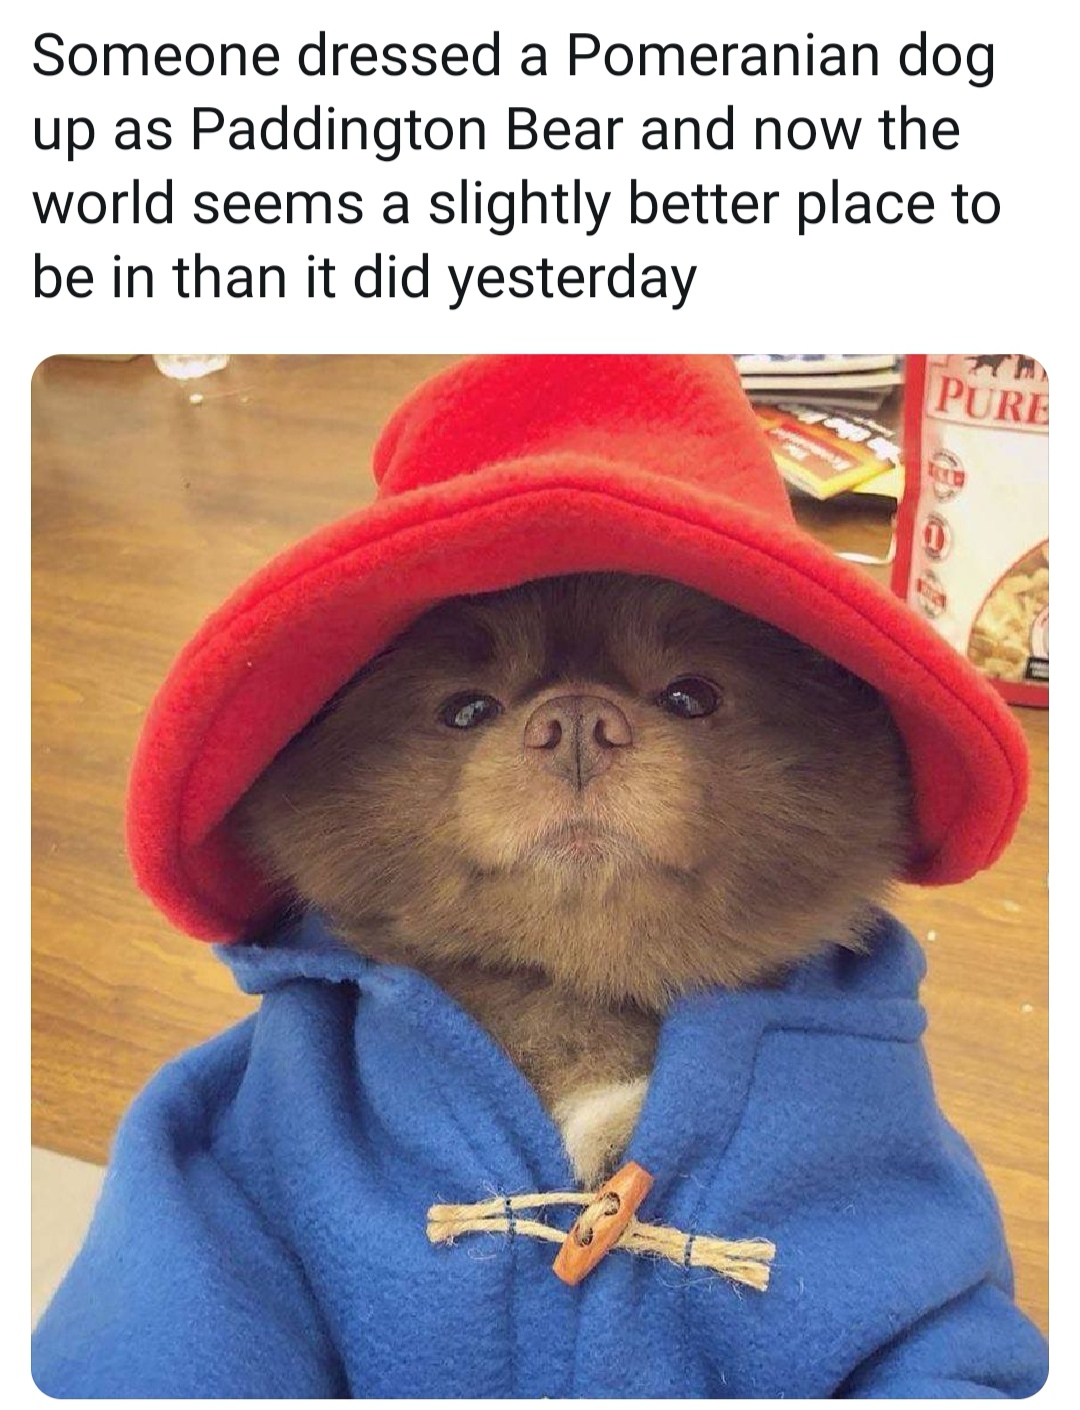 pomeranian paddington - Someone dressed a Pomeranian dog up as Paddington Bear and now the world seems a slightly better place to be in than it did yesterday Pure